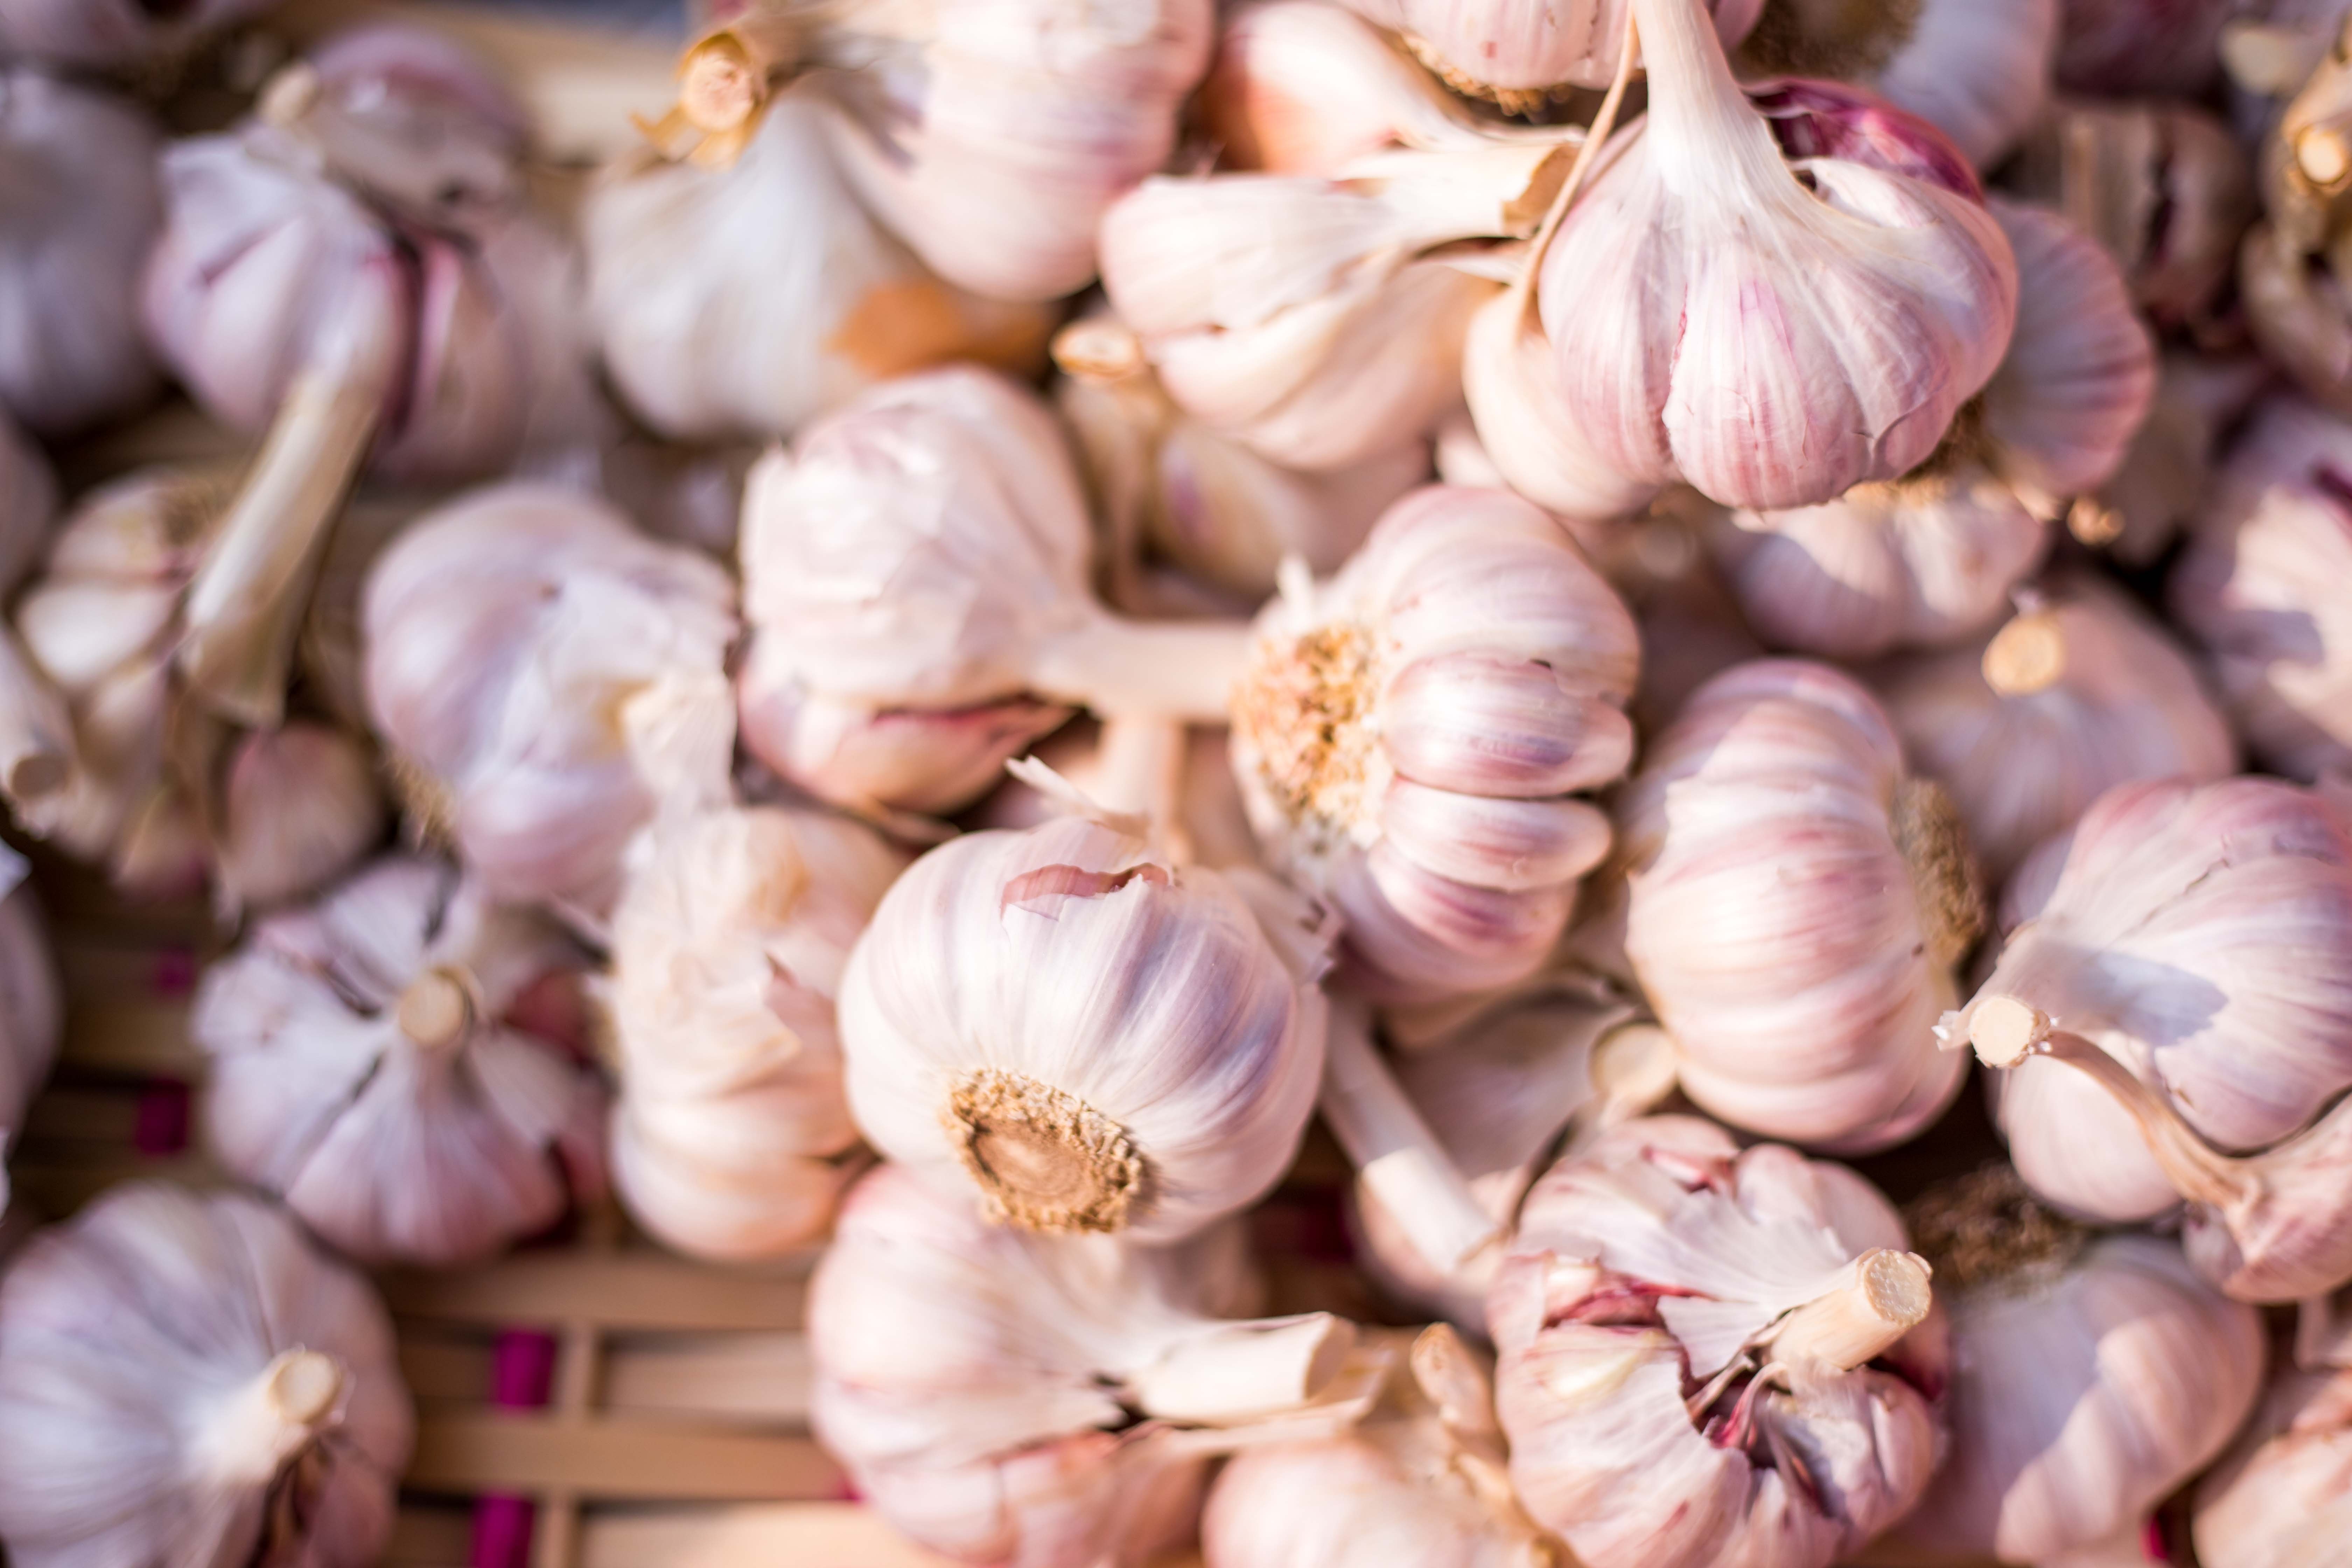 Eating garlic not a cure for coronavirus - WHO